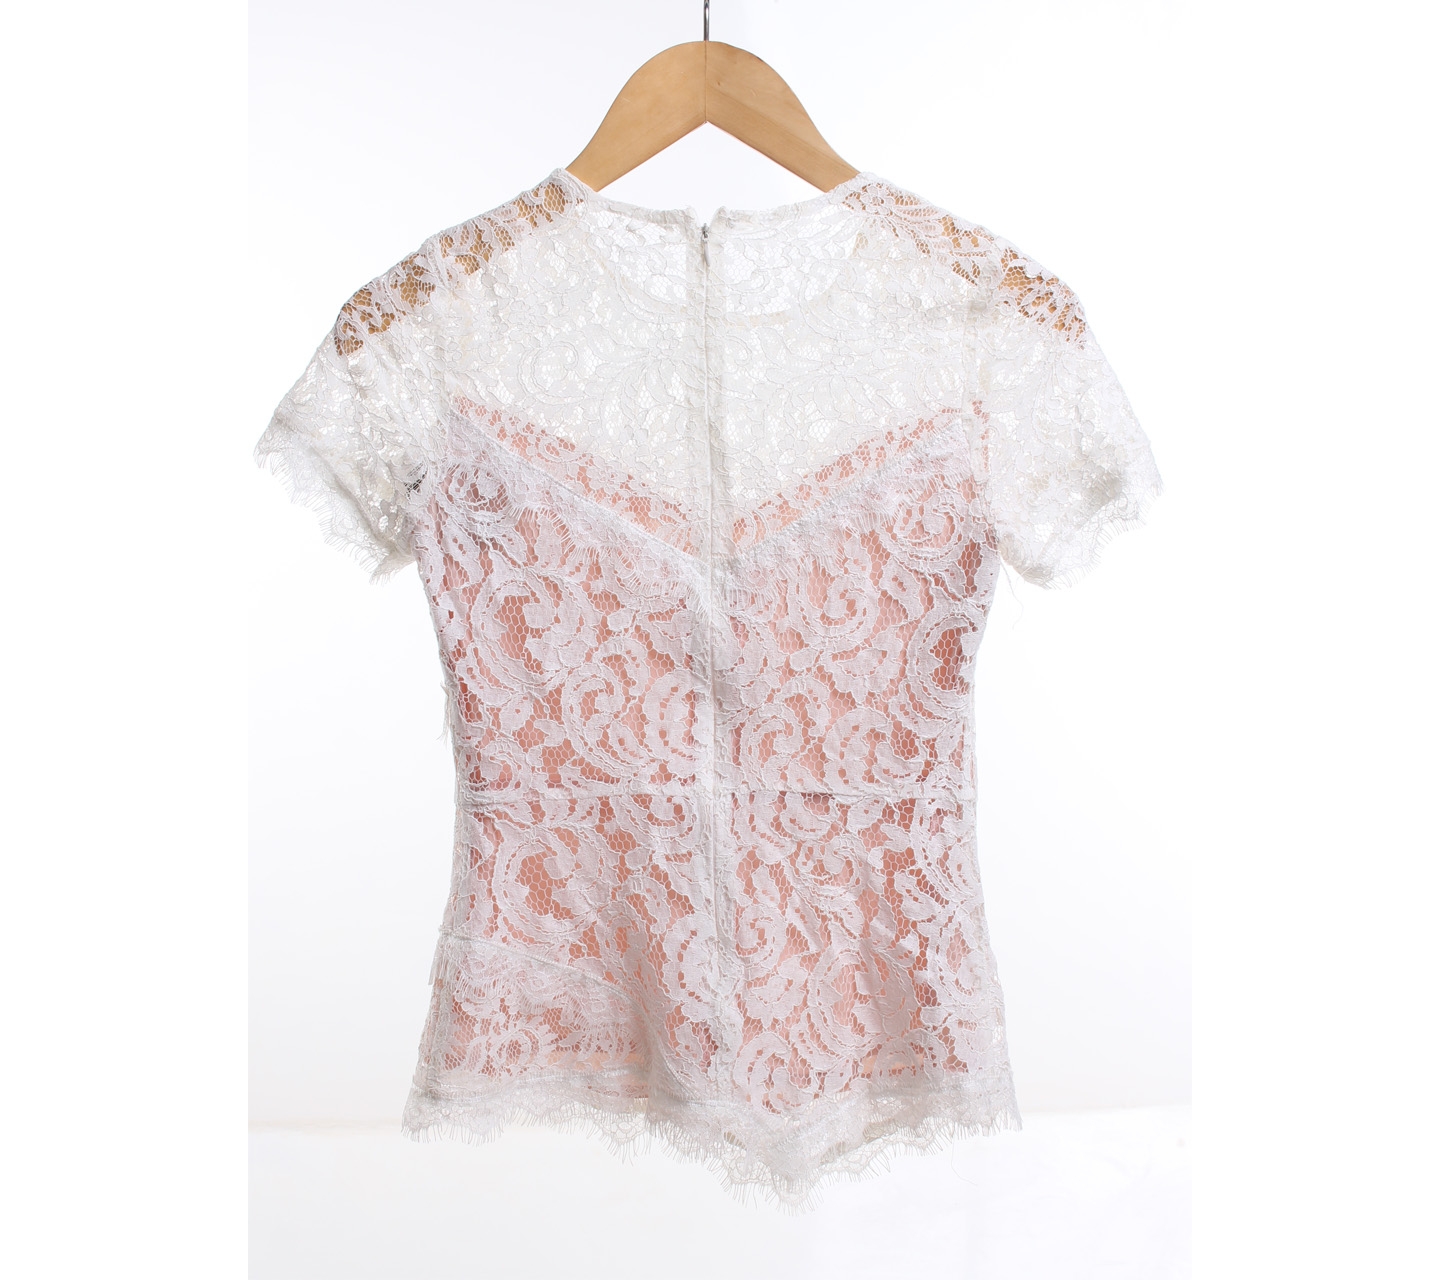 Off White And Cream Lace Blouse